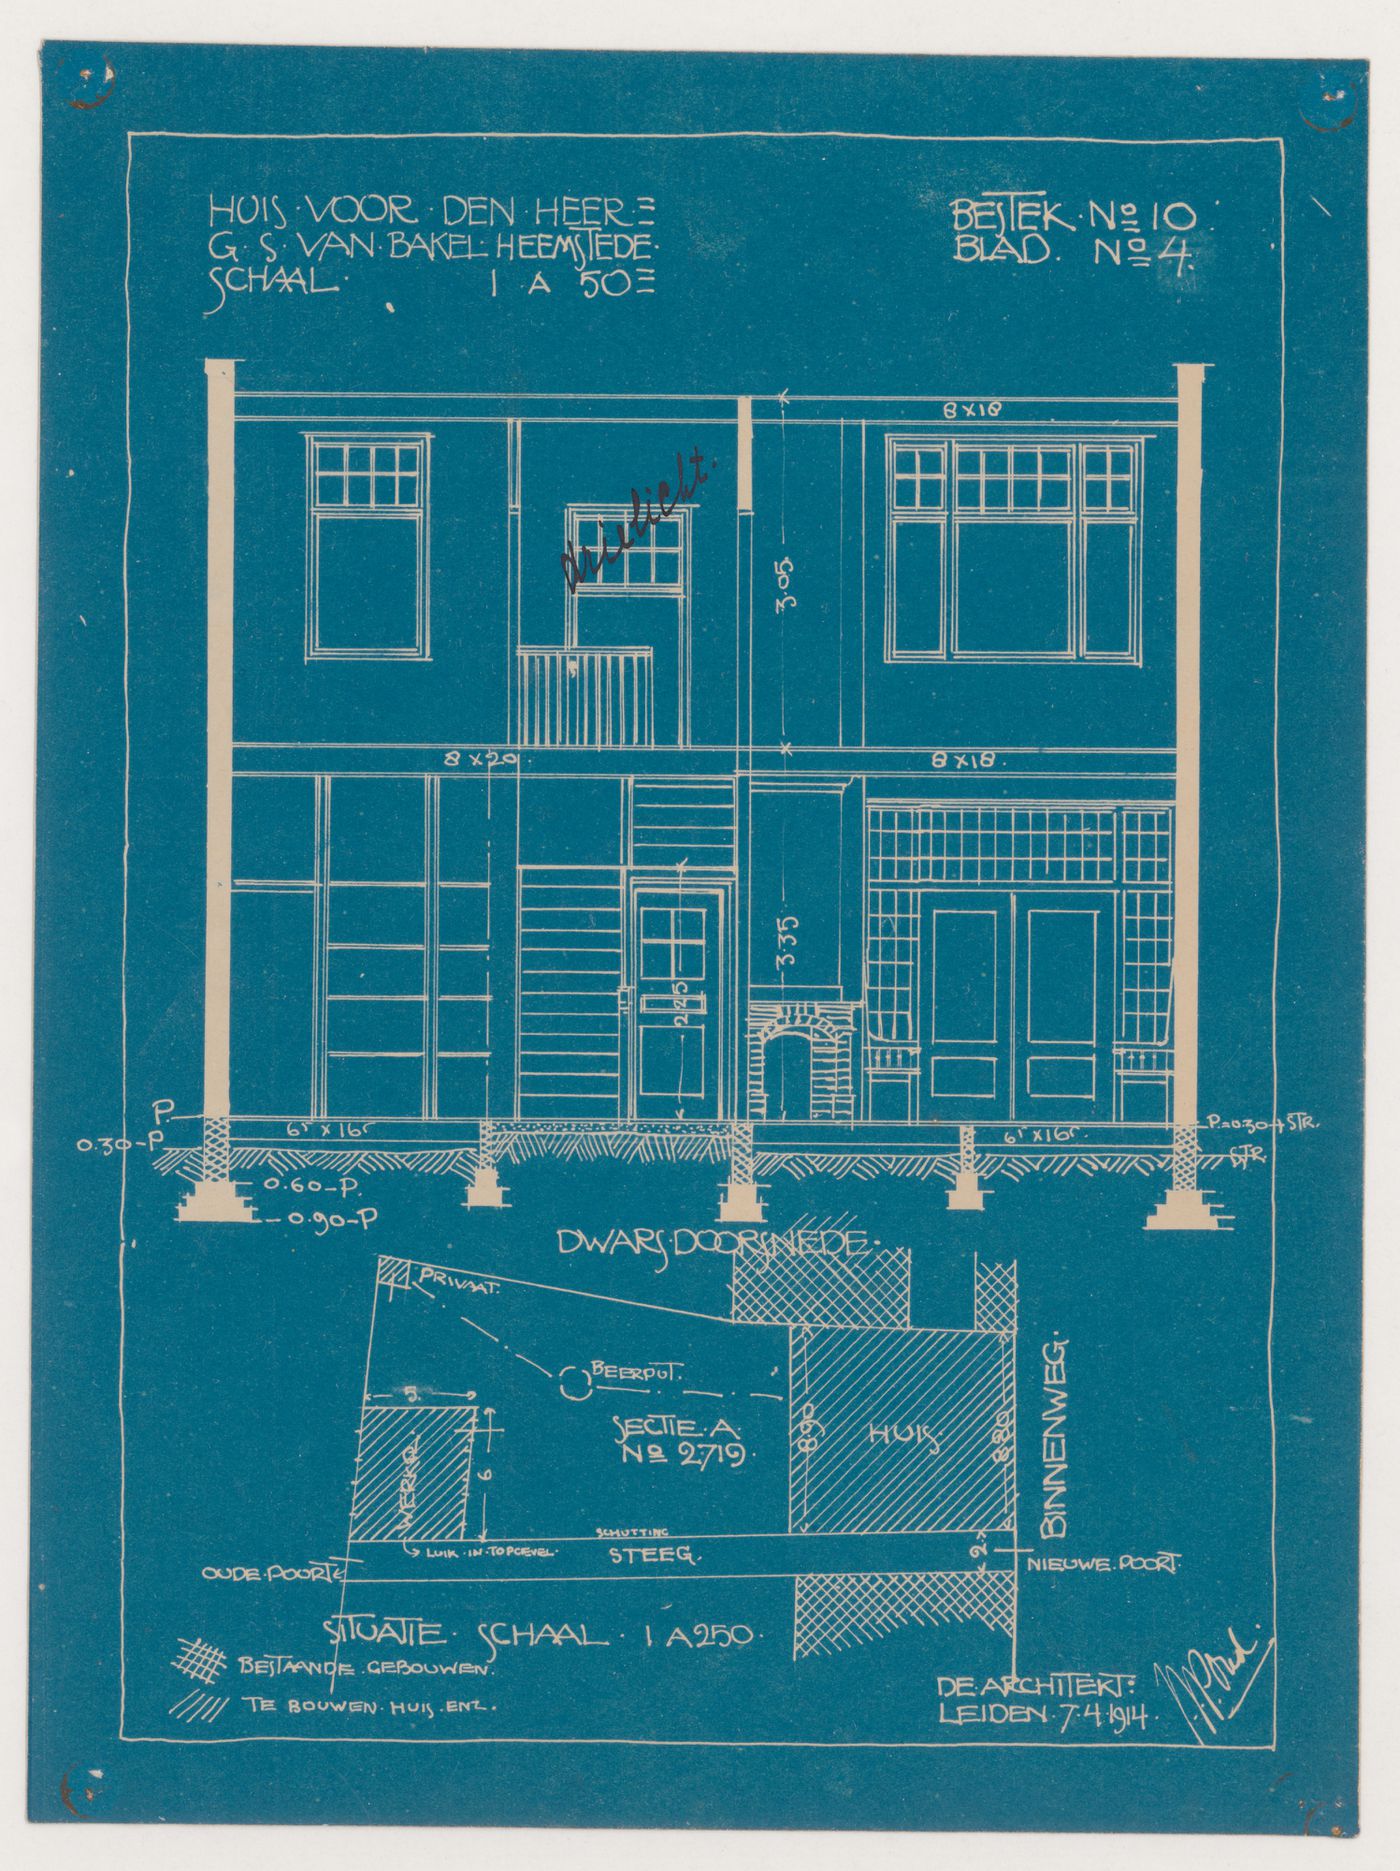 Cross section and site plan for a house and shop with a rectangular plan for Mr. G.S. van Bakel, Heemstede, Netherlands